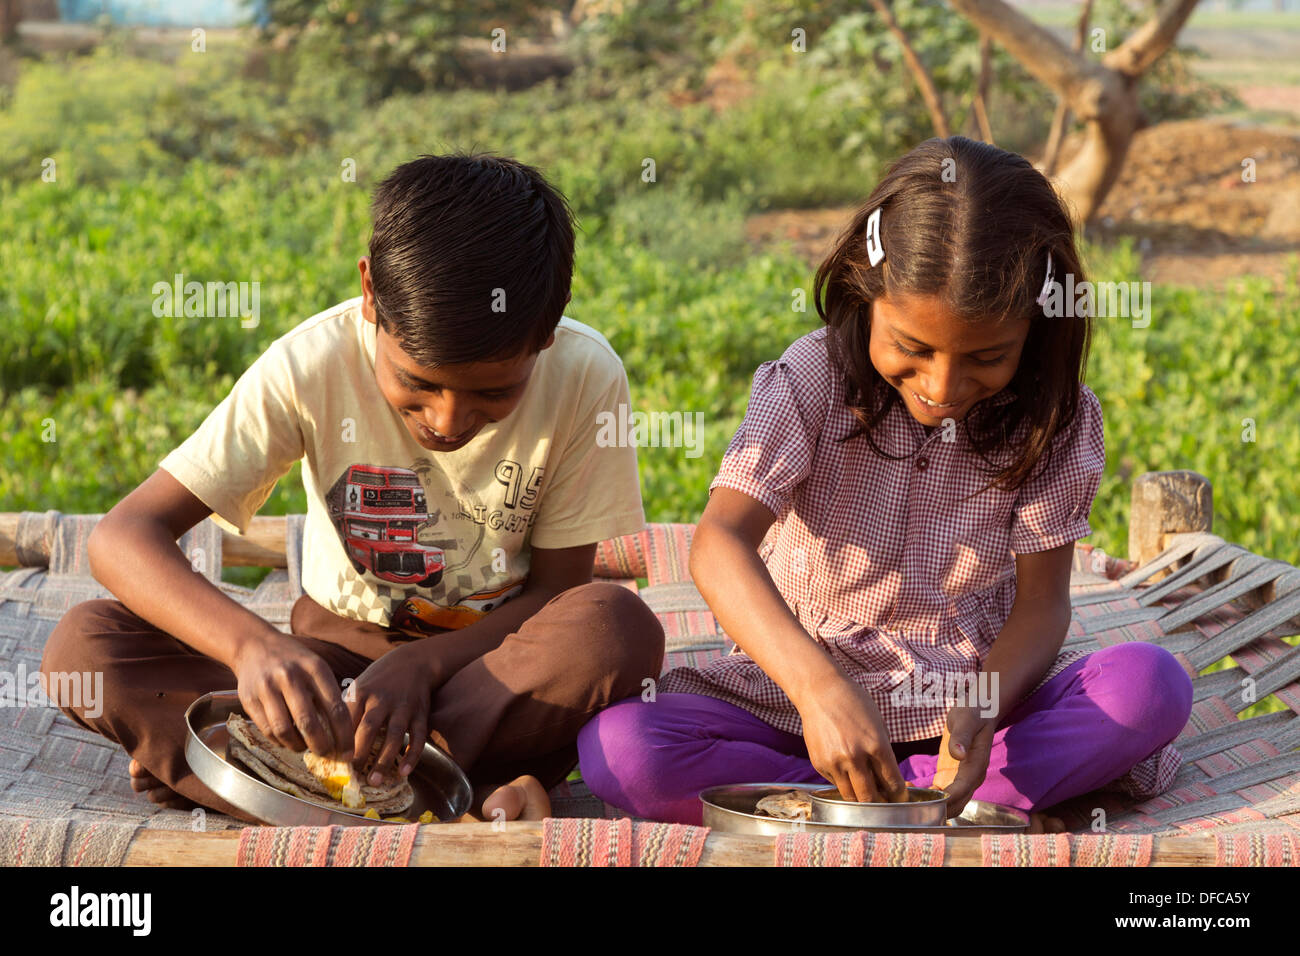 India, Uttar Pradesh, Agra, brother & sister eating traditional Indian breakfast of roti and curried potatoes, (aloo ghobi) Stock Photo